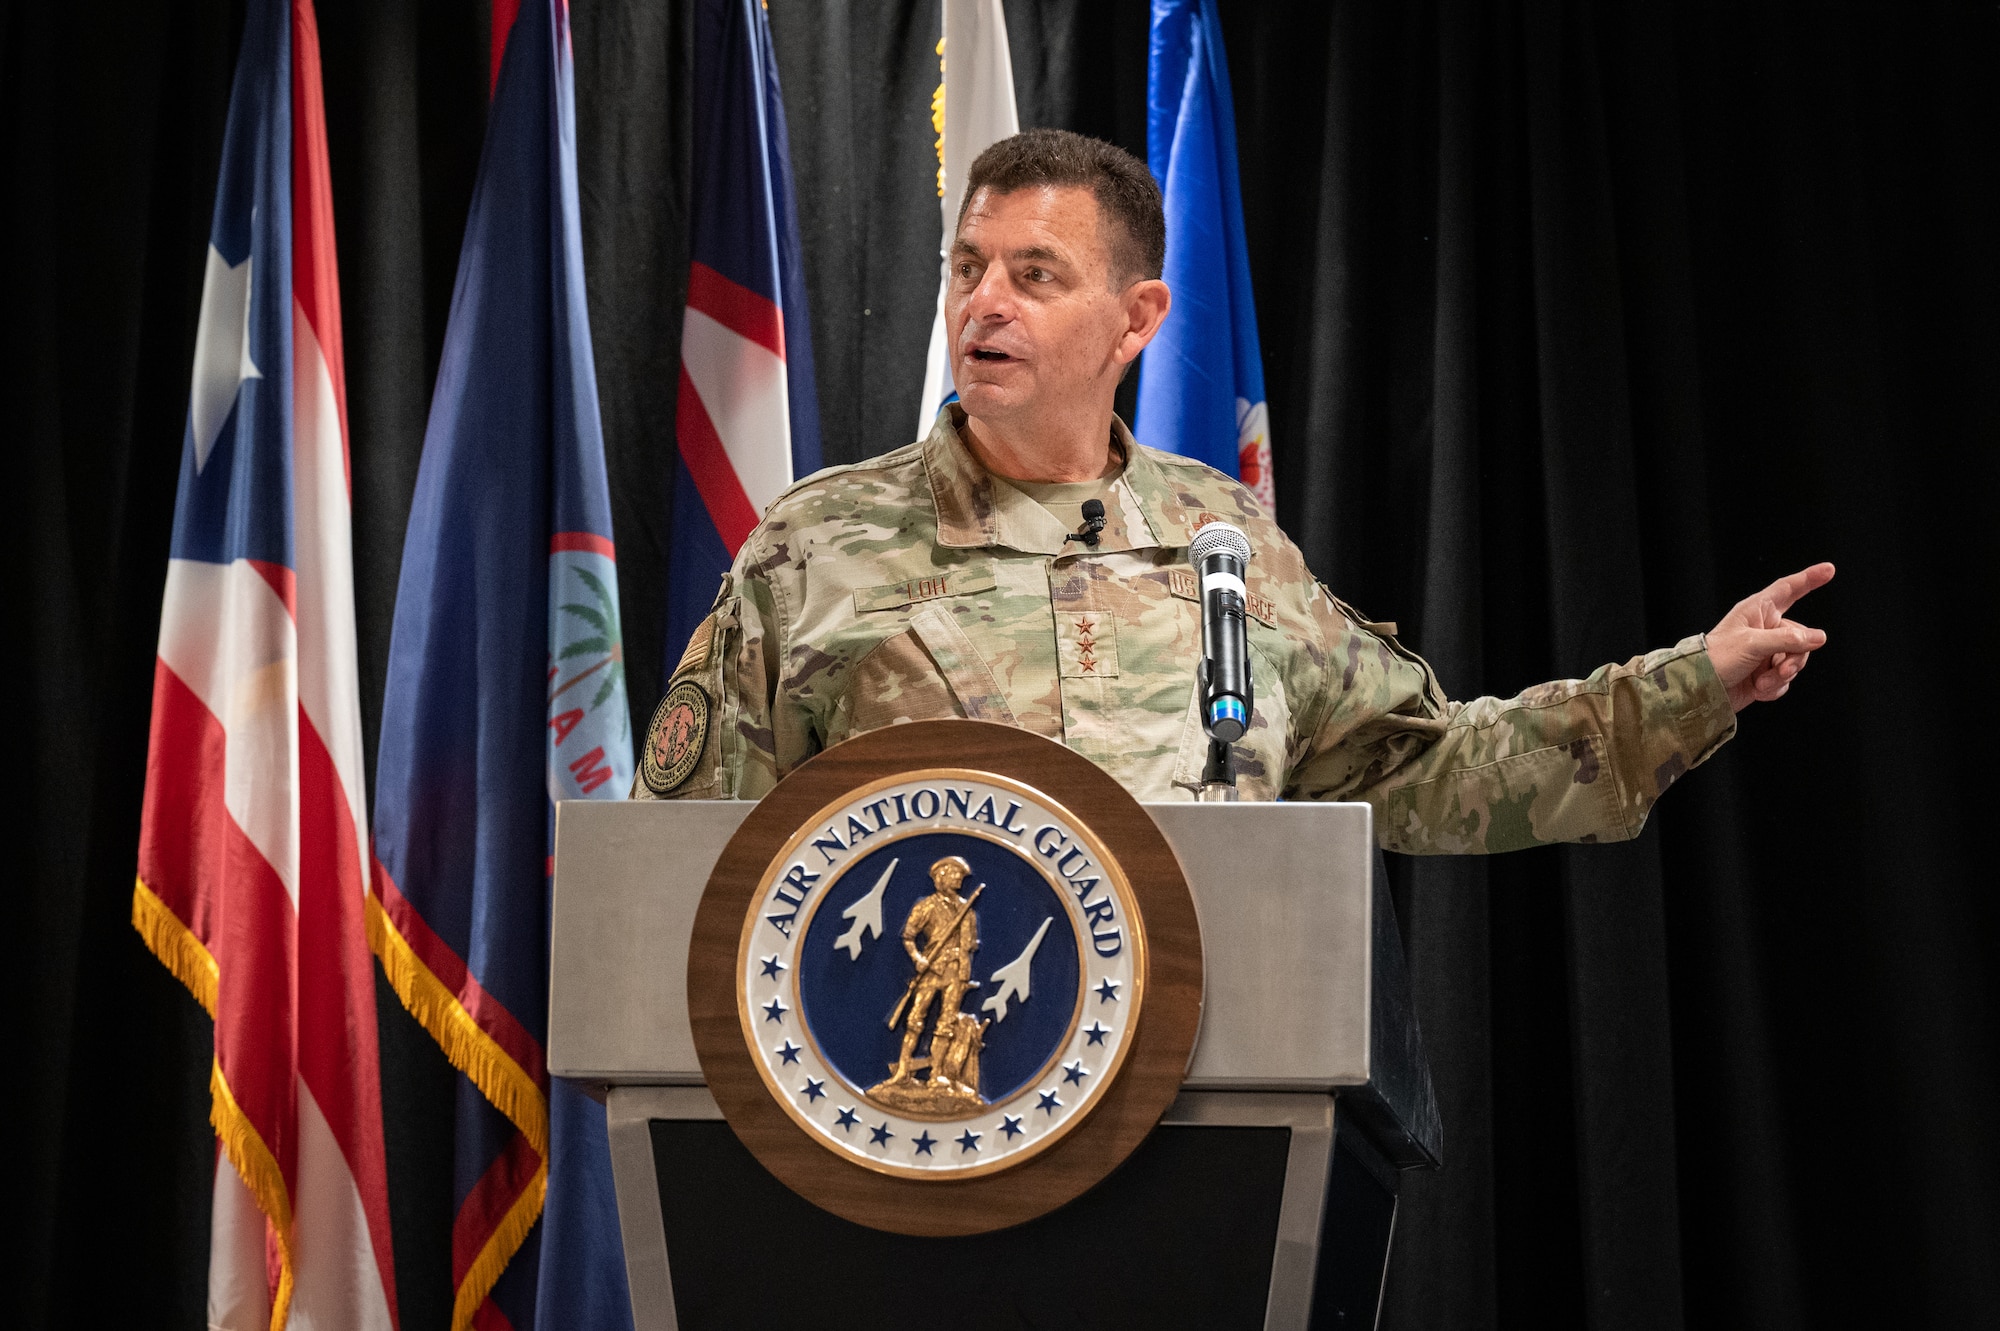 U.S. Air Force Lt. Gen. Michael A. Loh, director, Air National Guard (ANG), discusses critical matters impacting the future of the ANG during the 2023 Wing Leader Conference in Newport Beach, California, April 26, 2023.